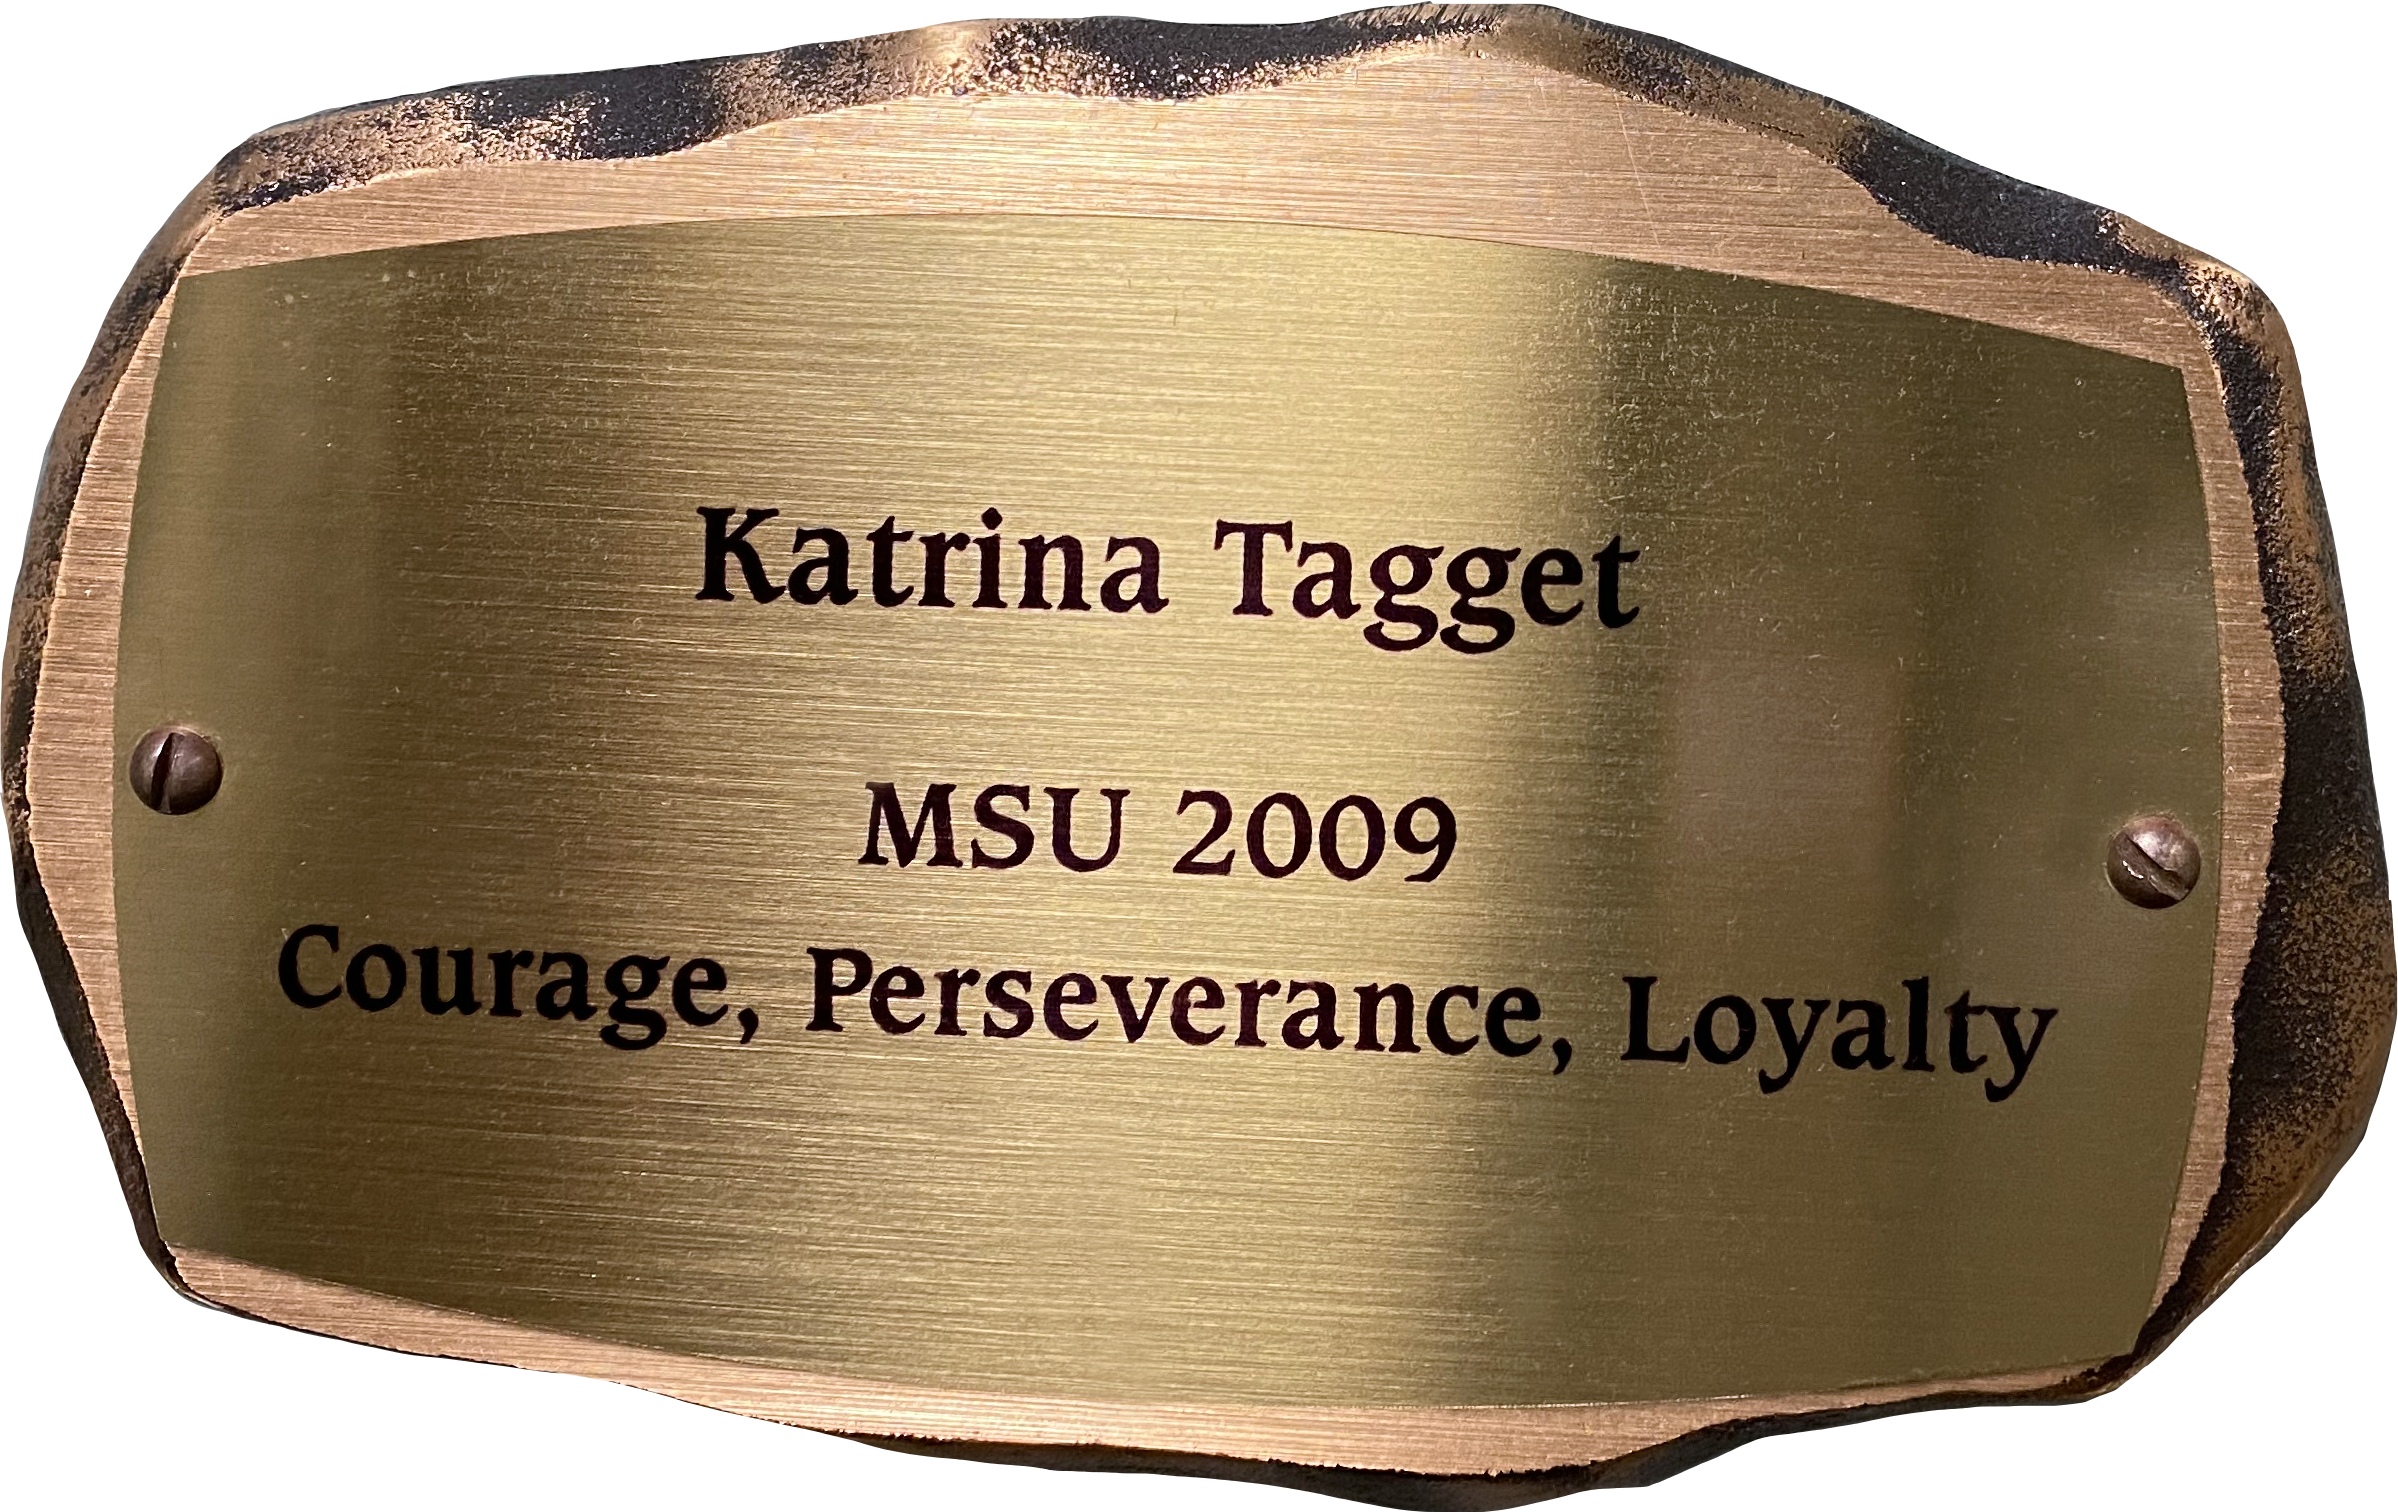 Inscribed bronze plaque in the shape of a rock with text on it reading: "Katrina Tagget MSU 2009 Courage, Perseverance, Loyalty"